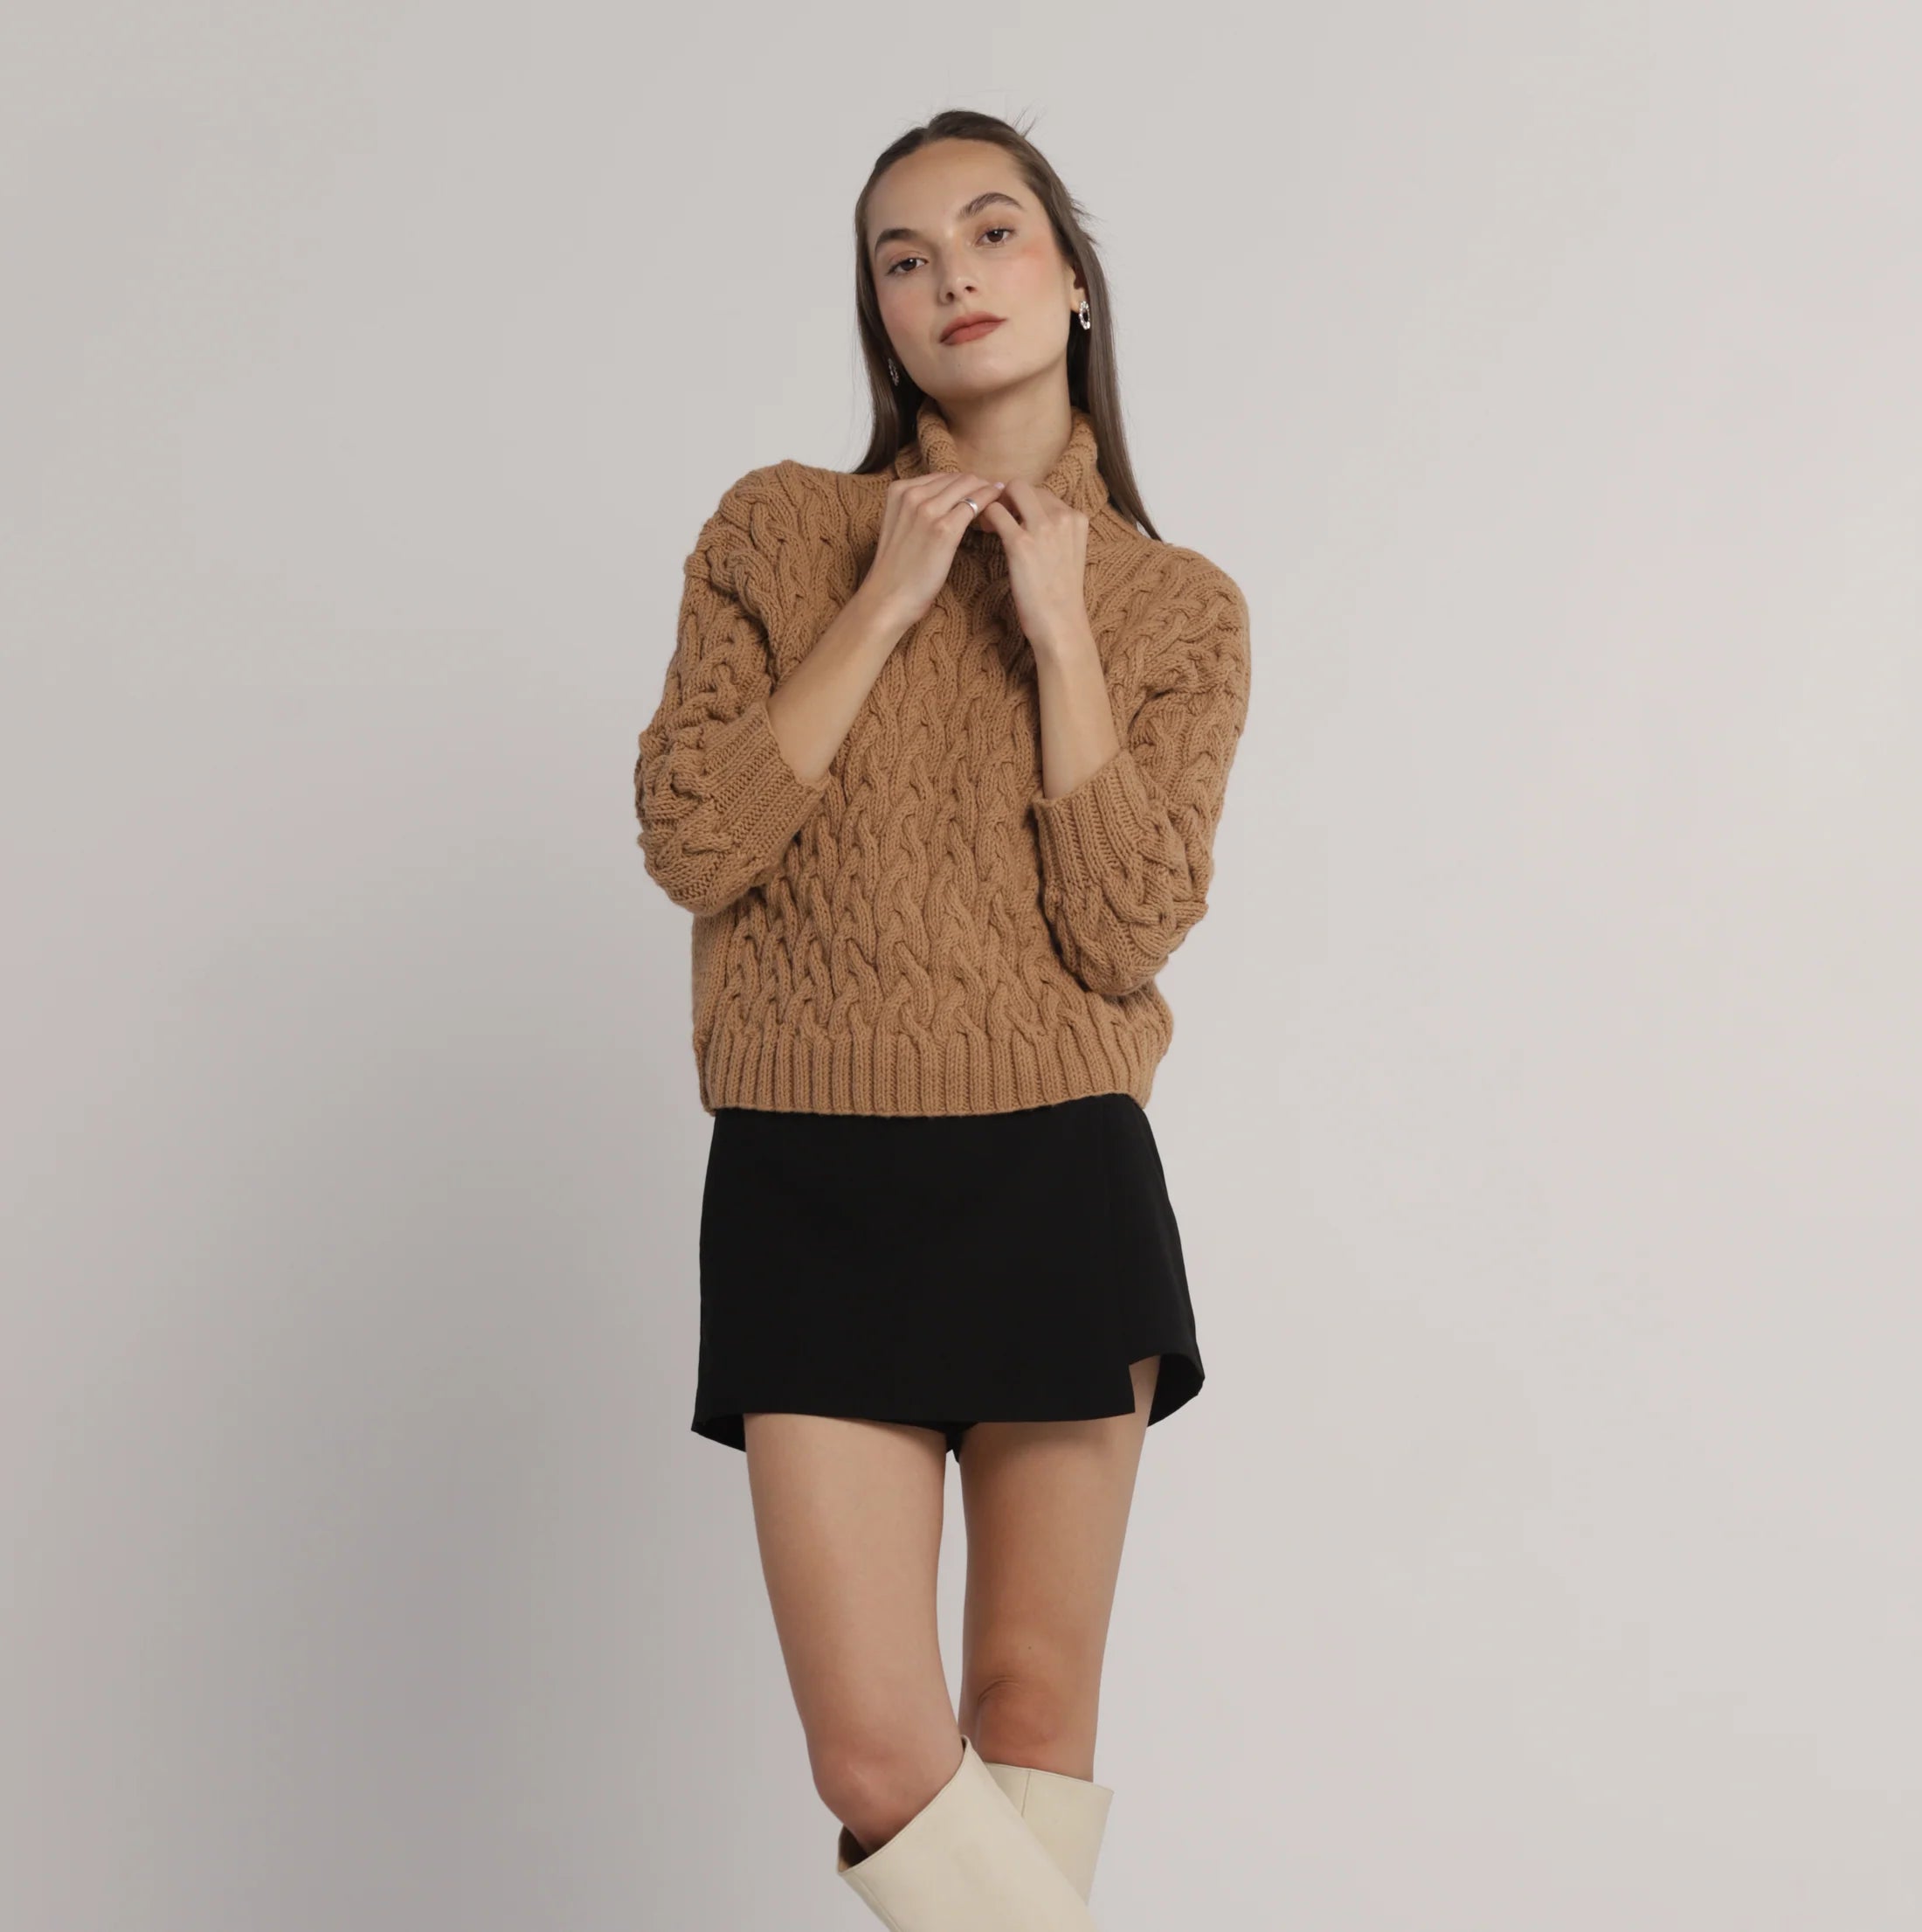 Braided Knit Sweater